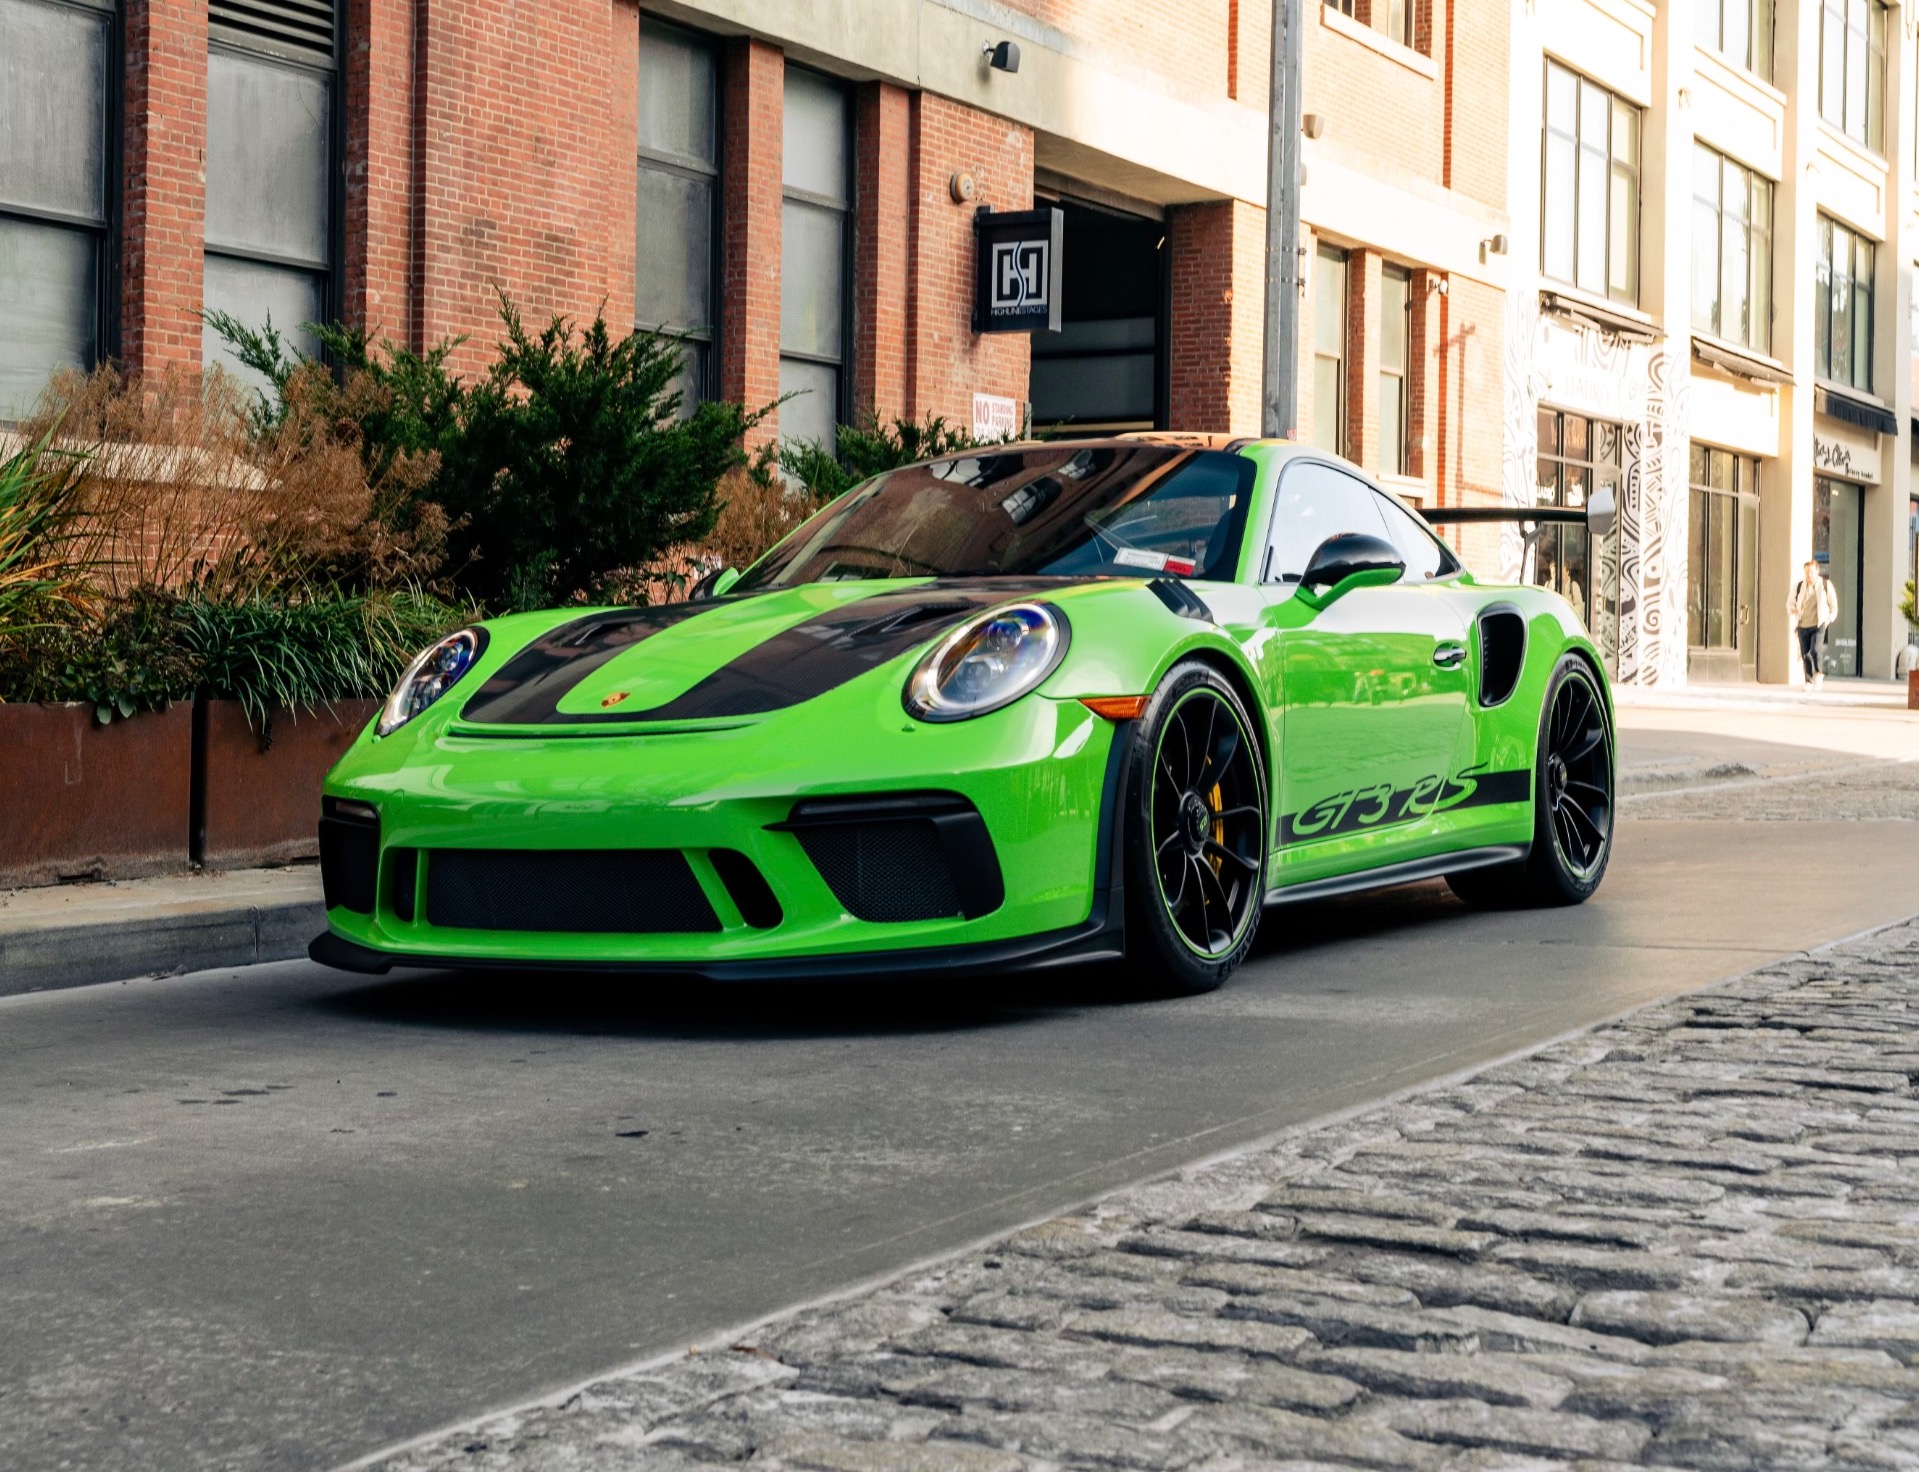 Used 2019 Porsche 911 GT3 RS For Sale ($255,500) | iLusso Palm Beach ...